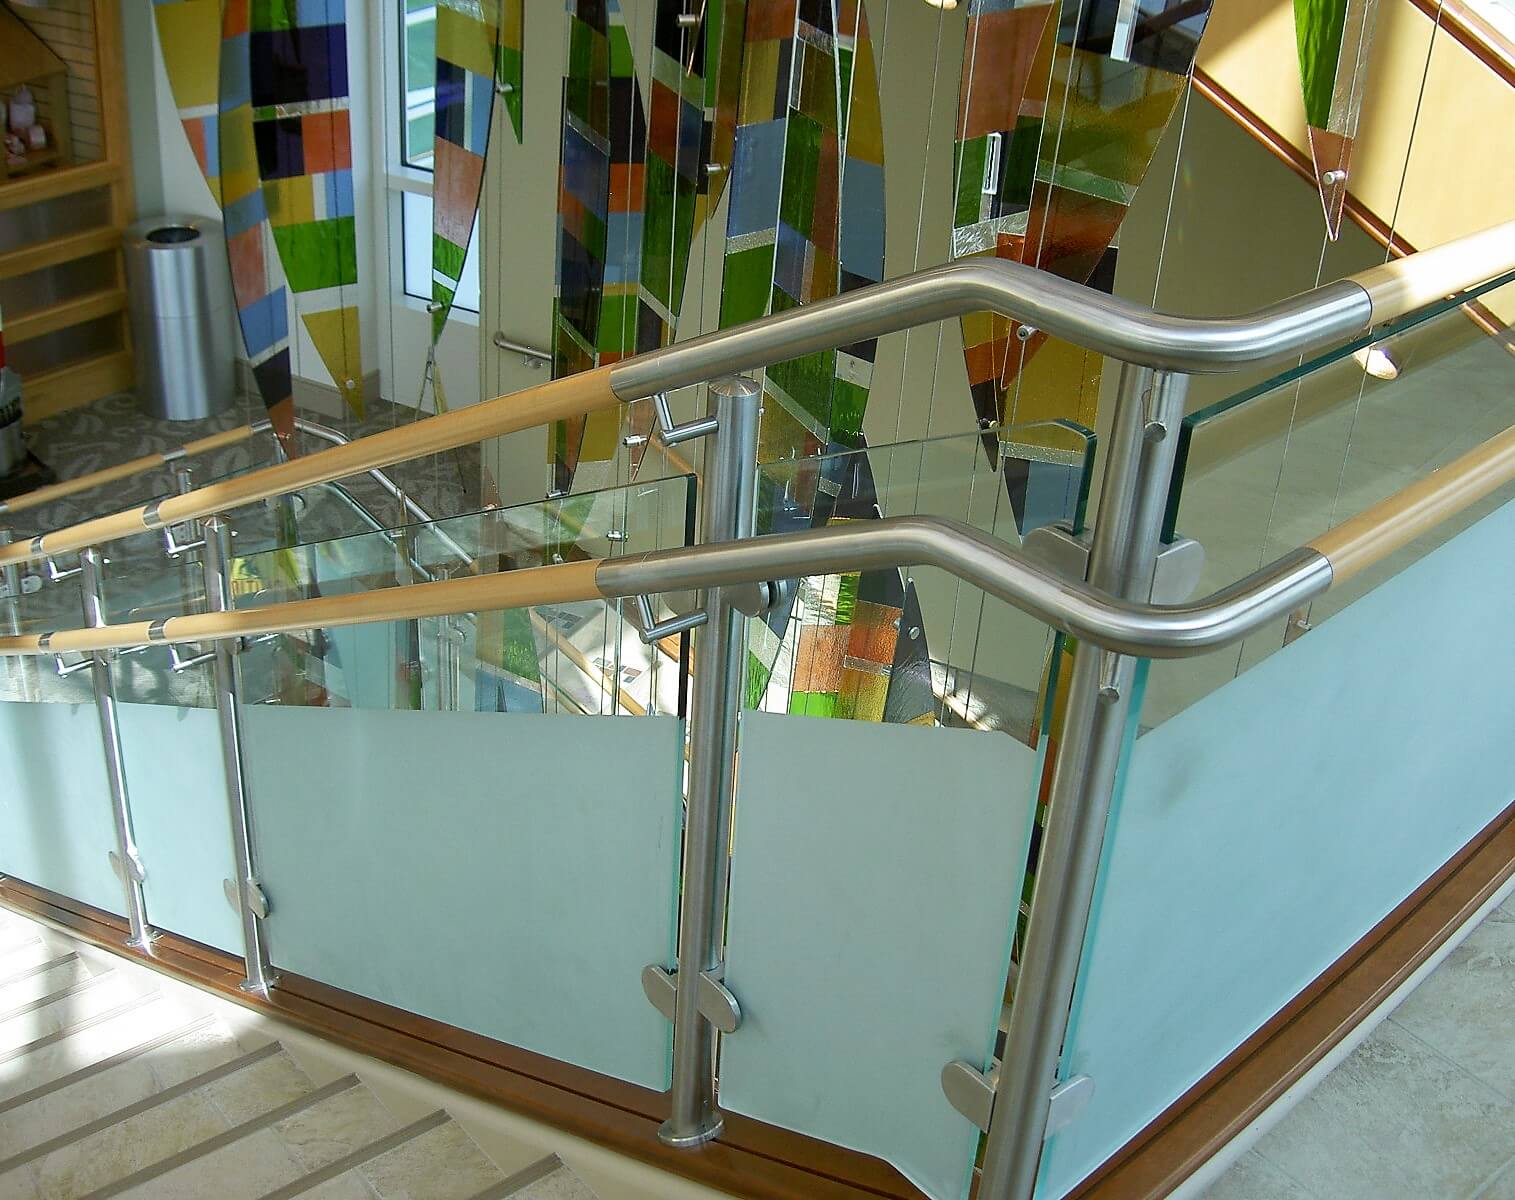 Circum guardrail installation with partially etched glass infill at Mercy Medical Center, OH.